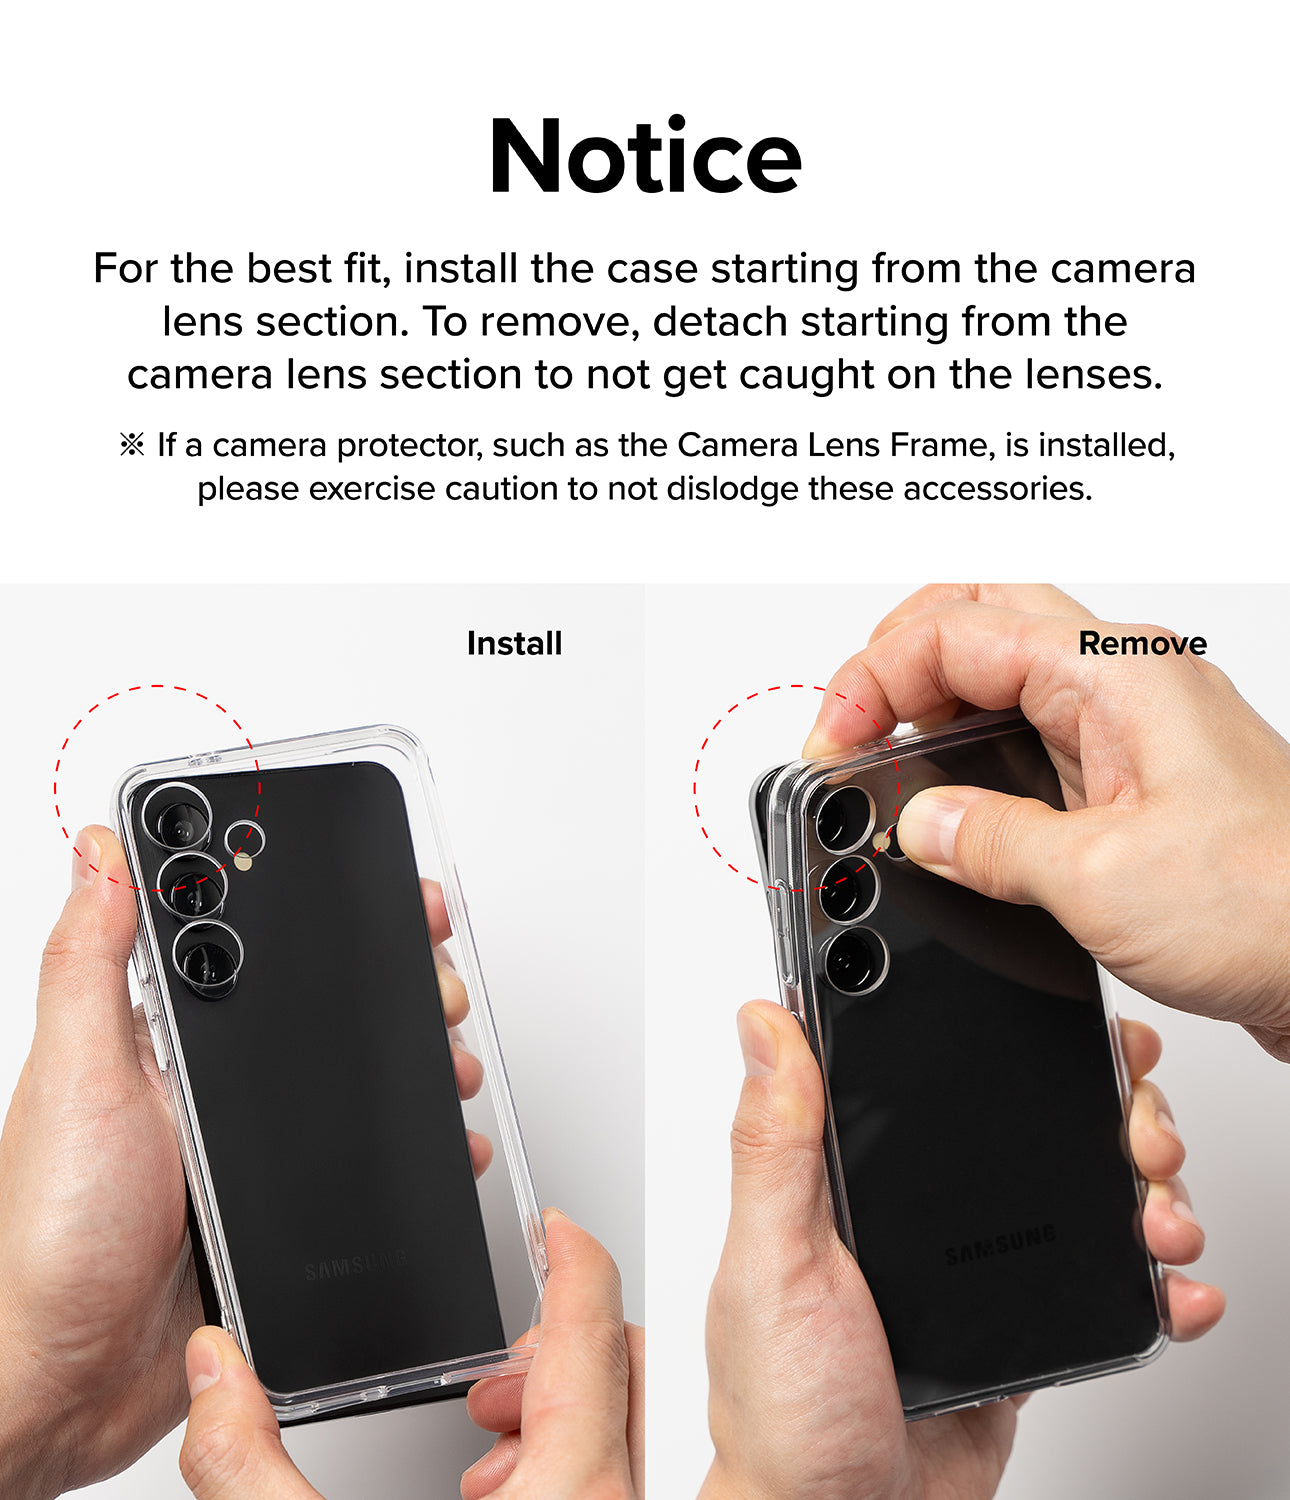 Galaxy S24 Ultra Case | Air Bumper - Notice. For the best fit, install the case starting from the camera lens section. To remove, detach starting from the camera lens section to not get caught on the lenses.